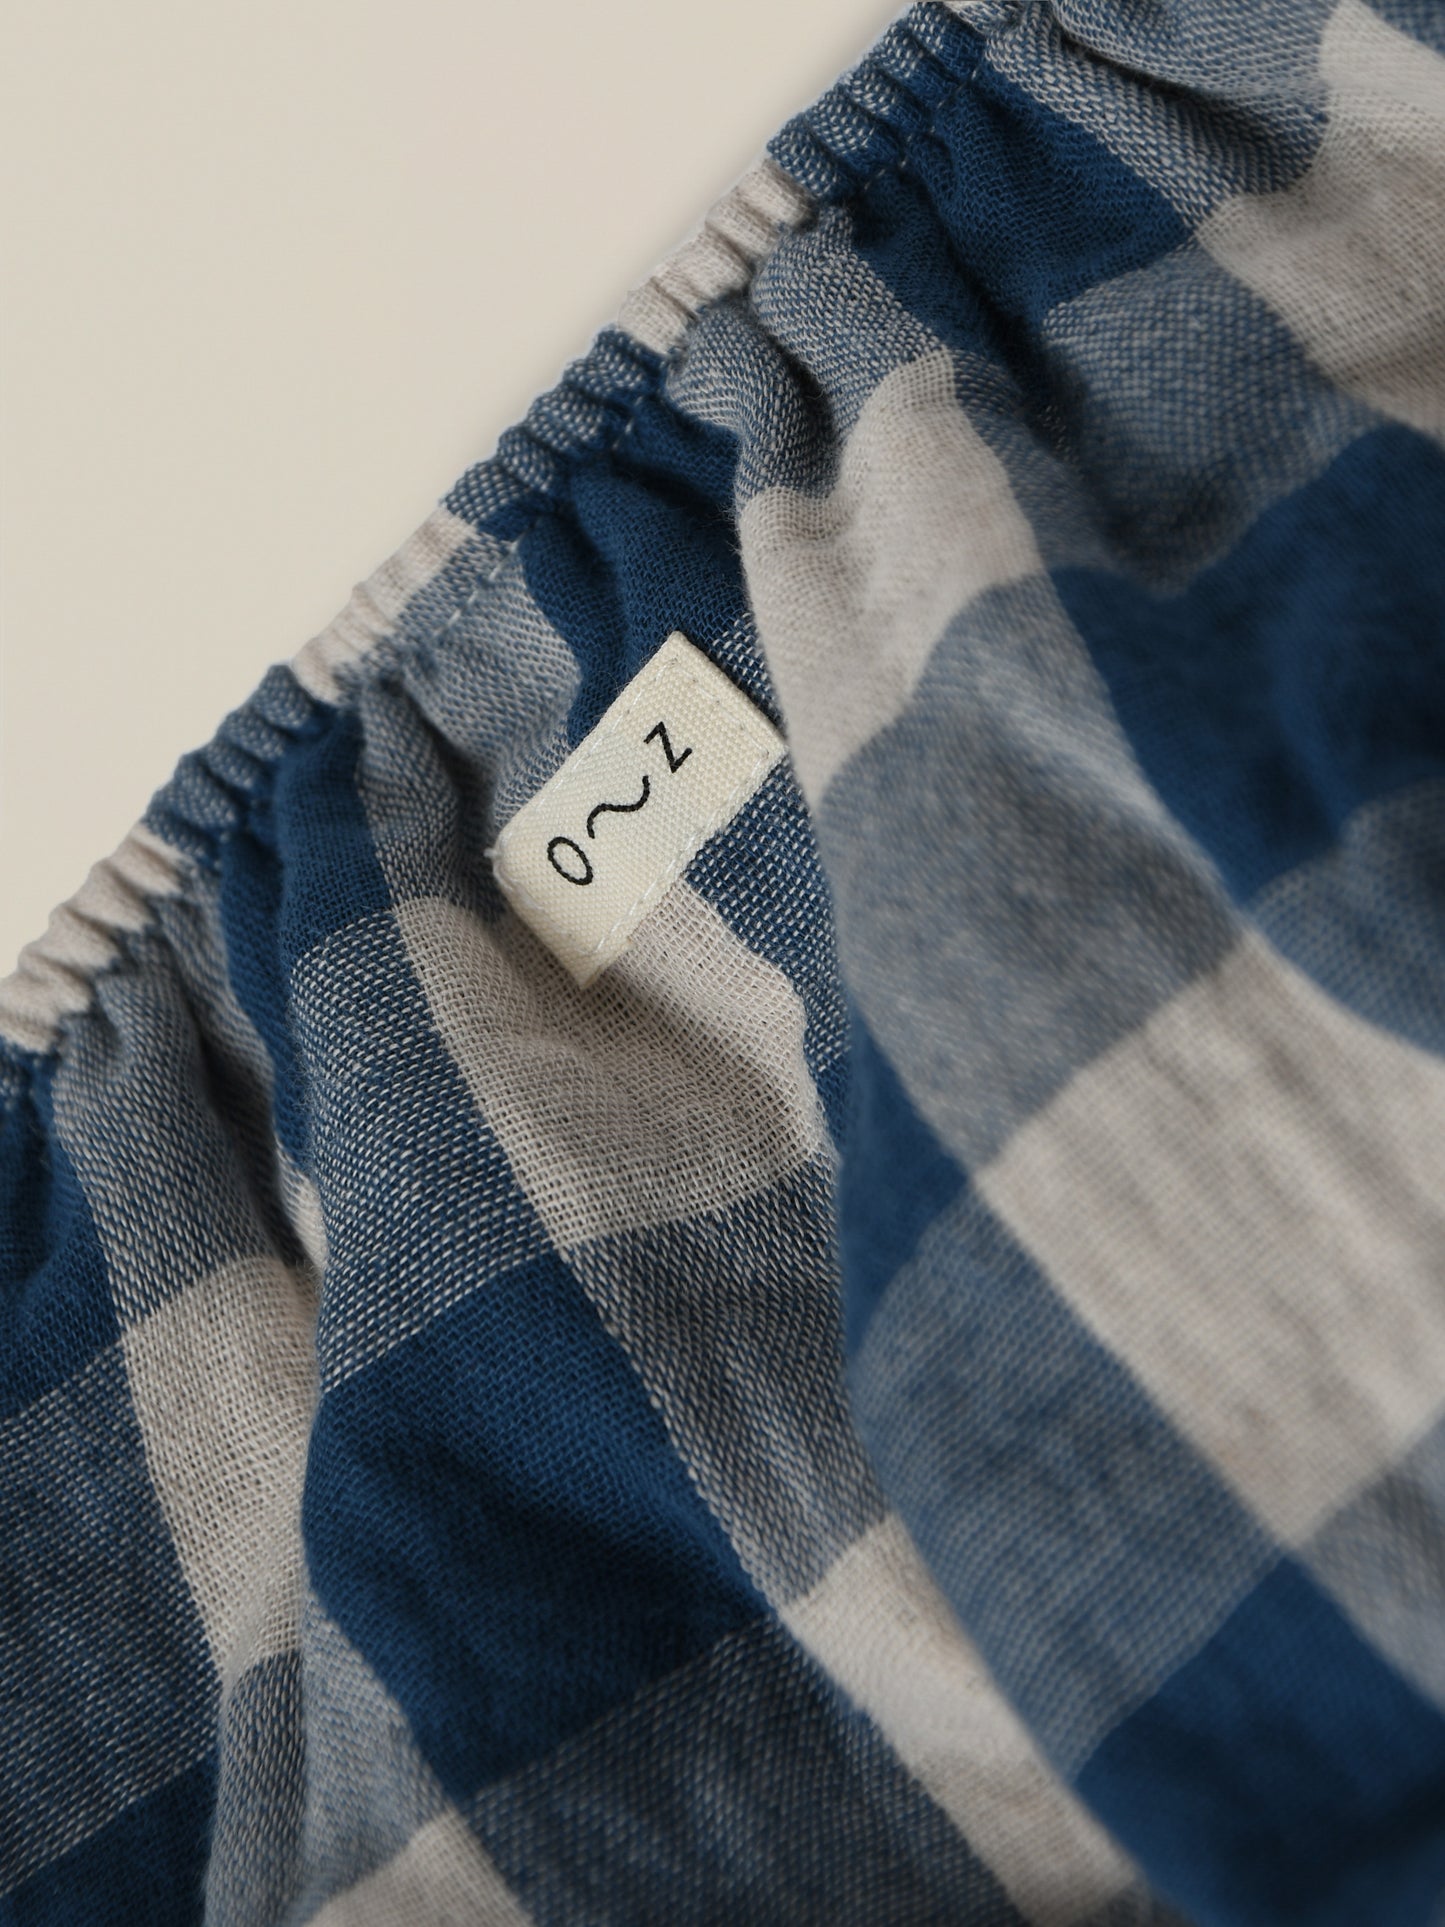 【LAST ONE】Pottery Blue Gingham Shortie